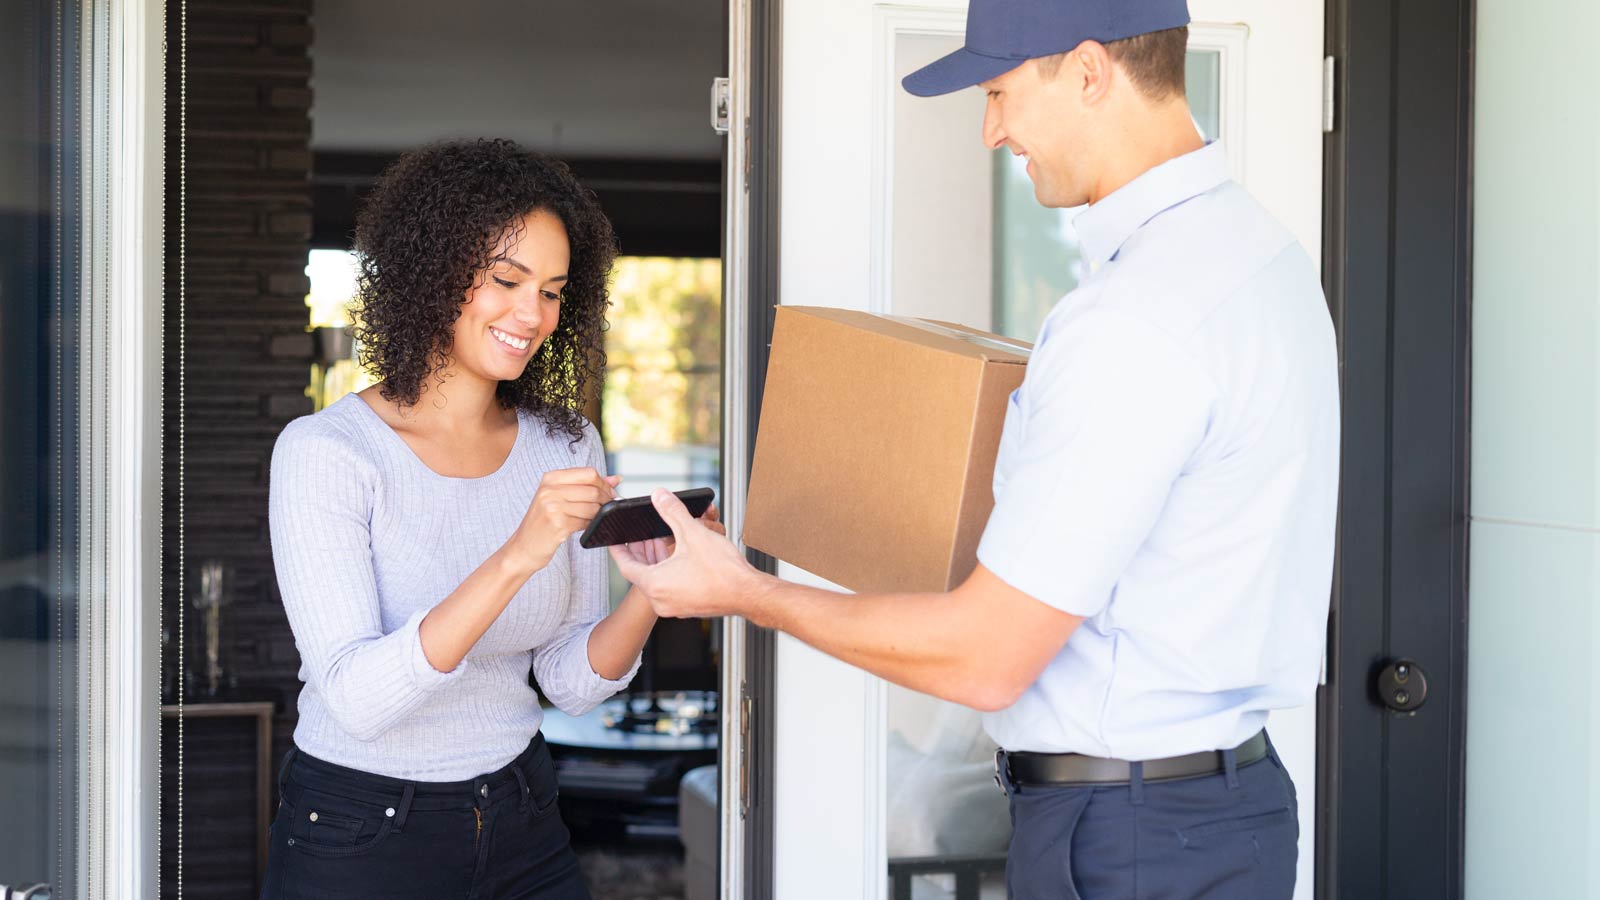 Wine delivery, woman signing for package